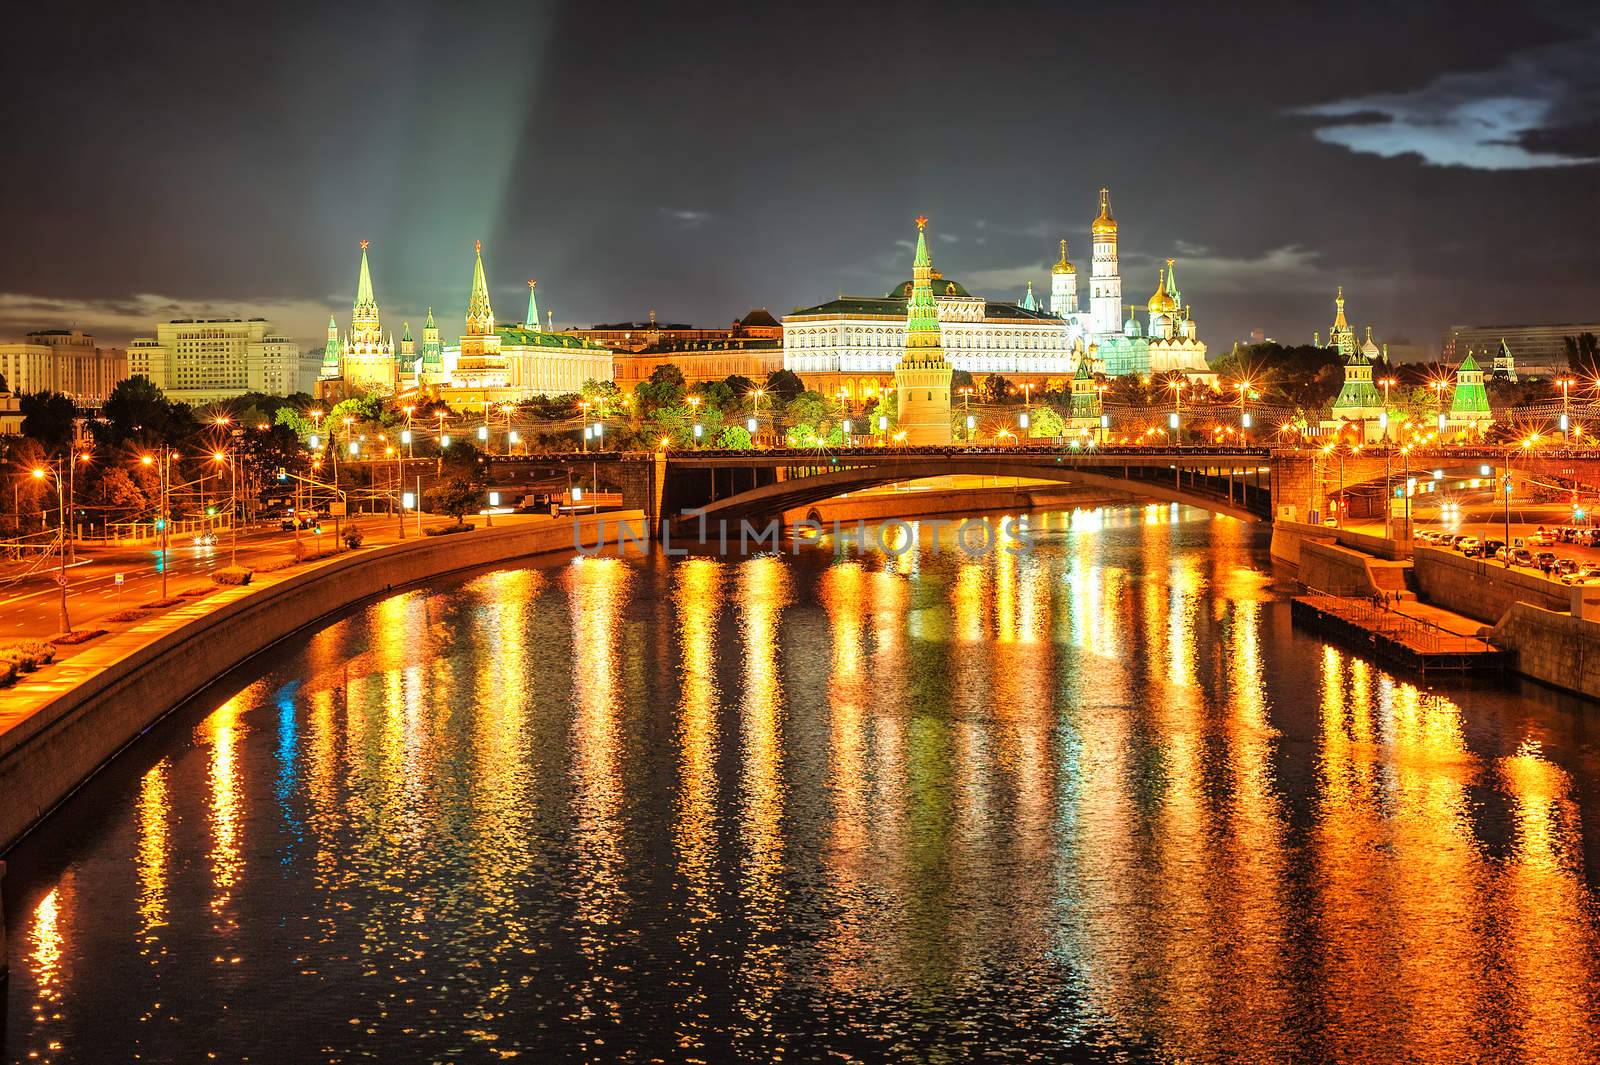 Moscow Kremlin at night, Russia by GlobePhotos